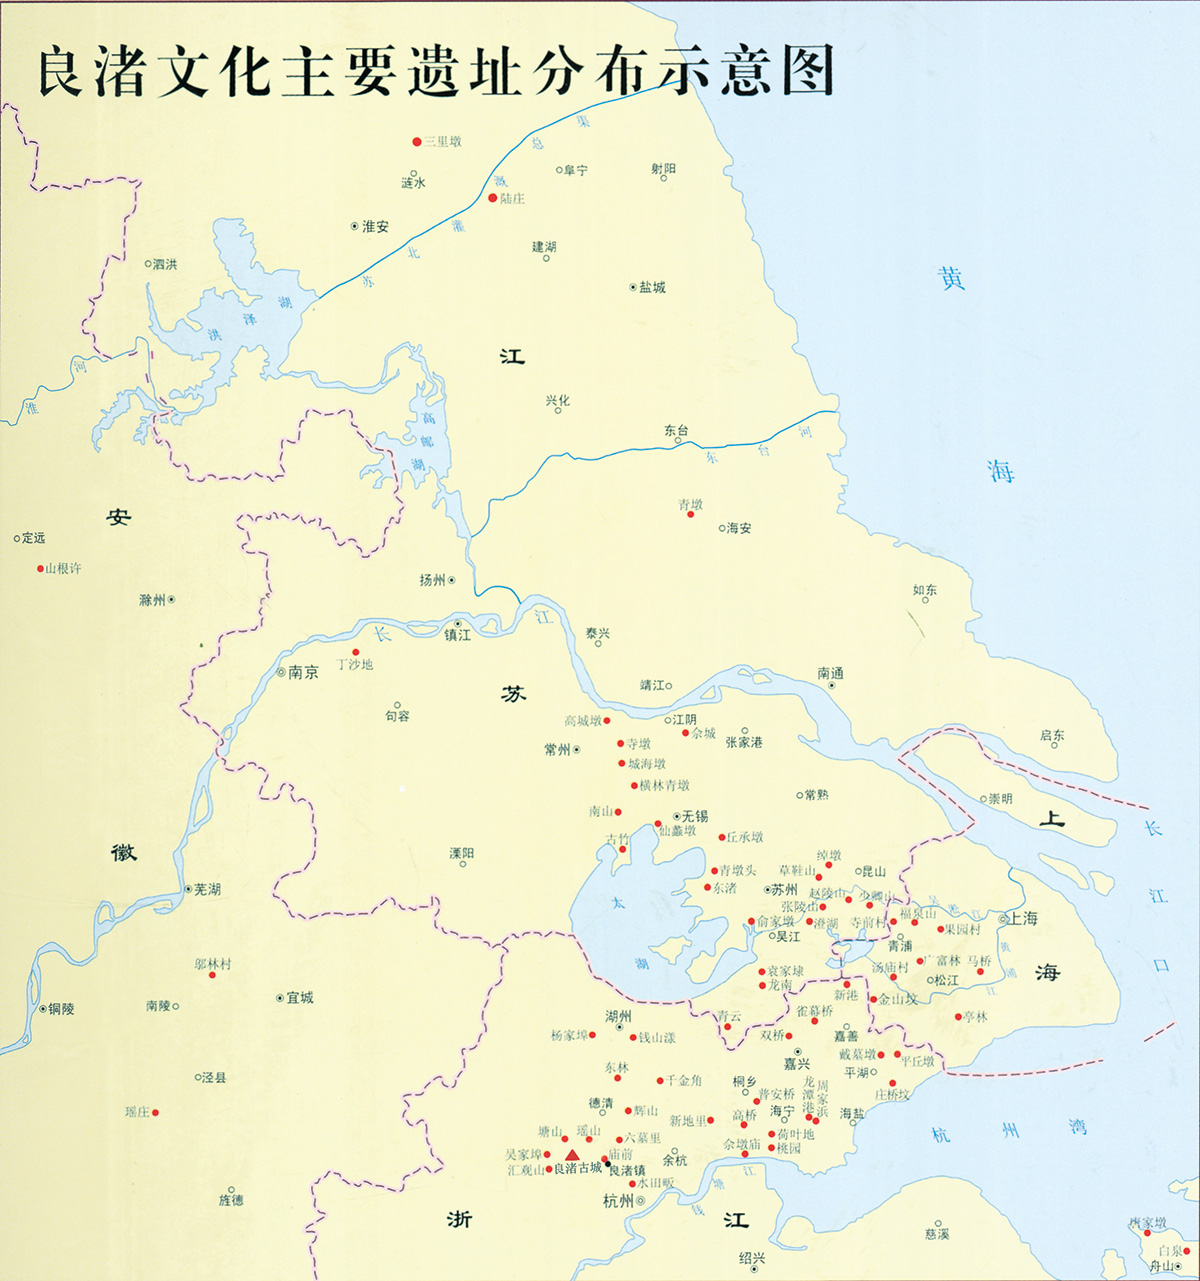 Figure 1 - Map of important Liangzhu sites